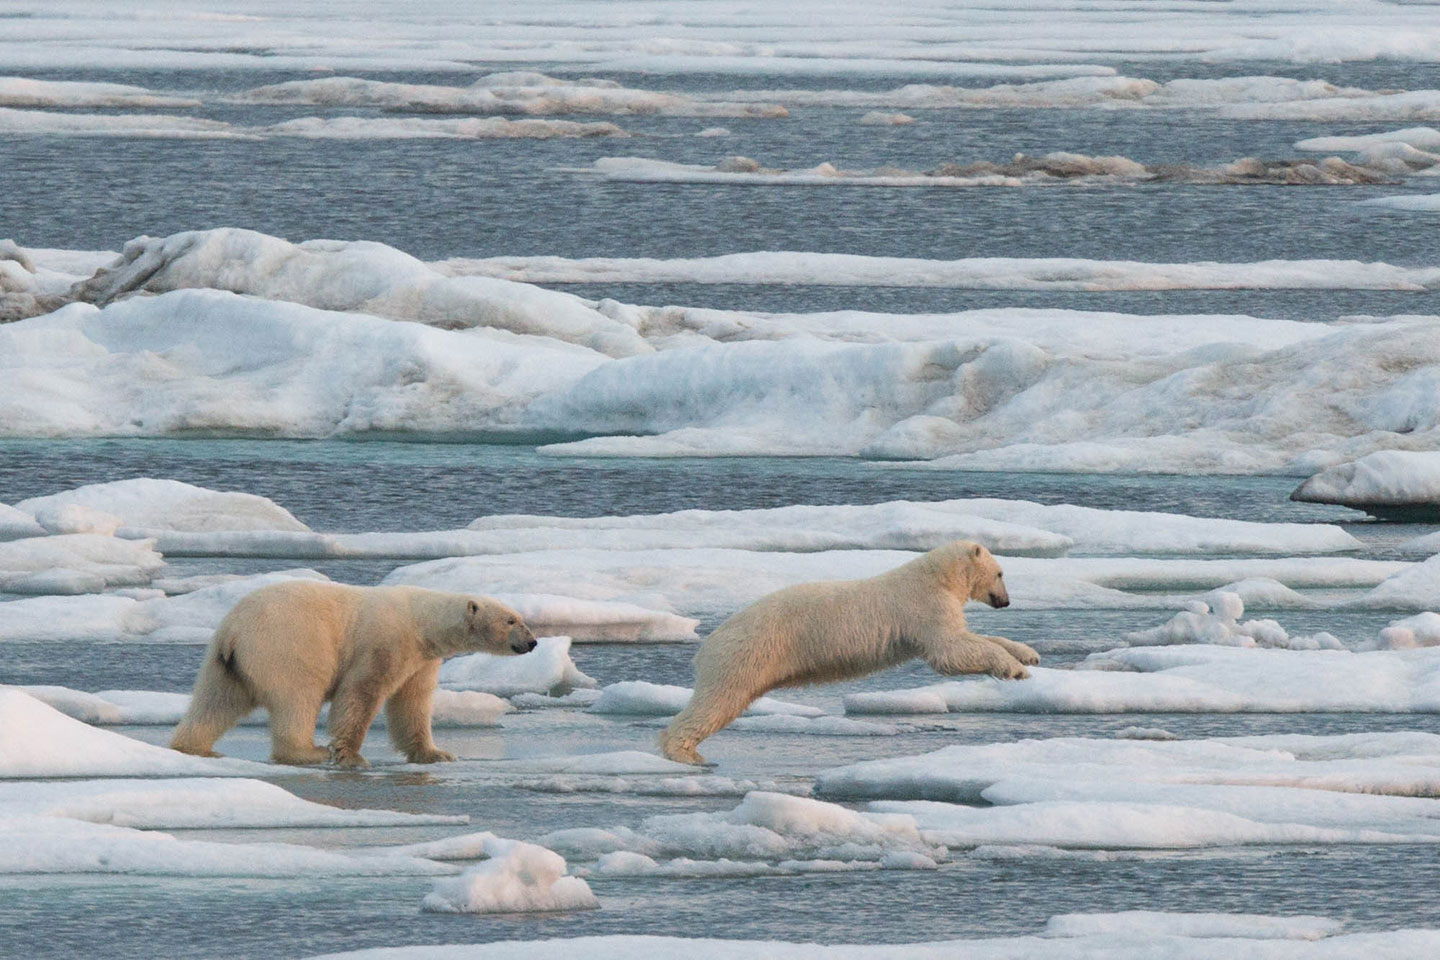 Polar bears are the major attraction for nature lovers to the Arctic 